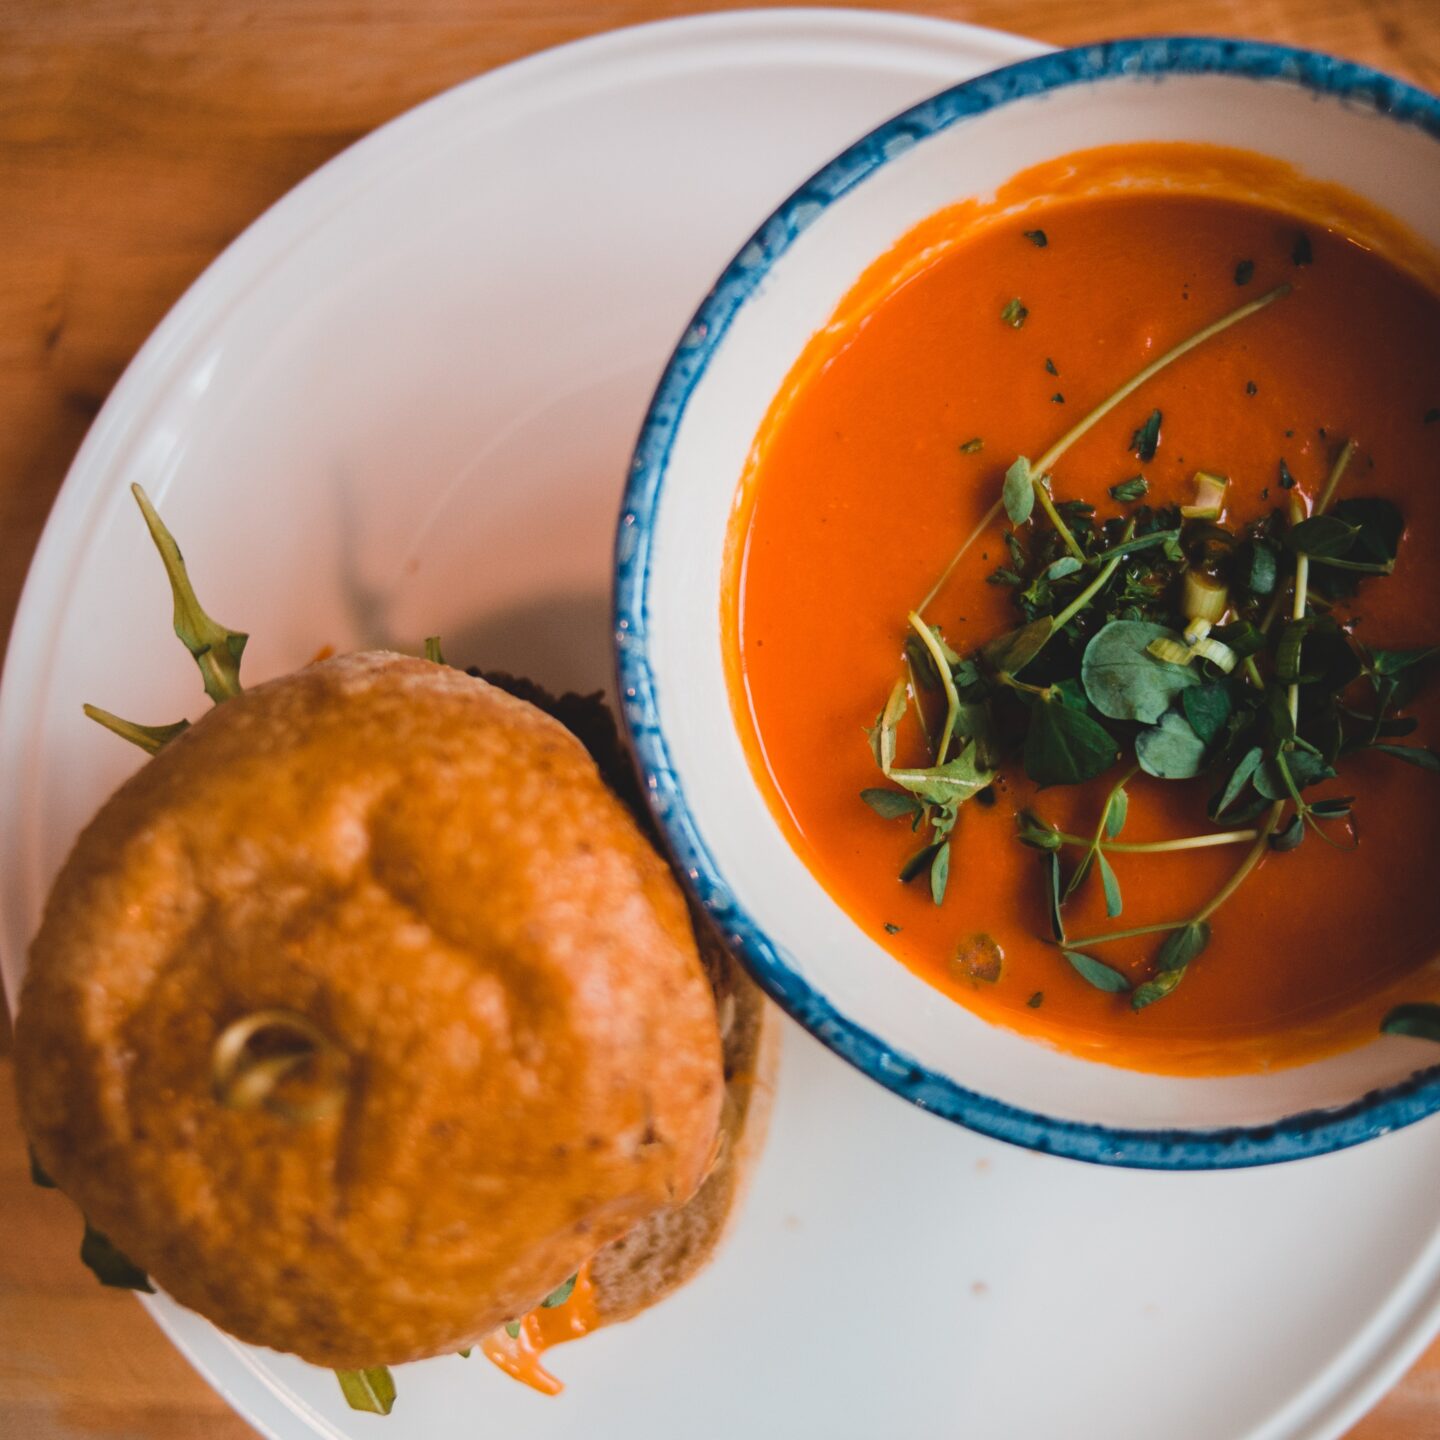 Photo by Erik Mclean: https://www.pexels.com/photo/crispy-hamburger-and-bright-tomato-soup-in-cafe-4062274/